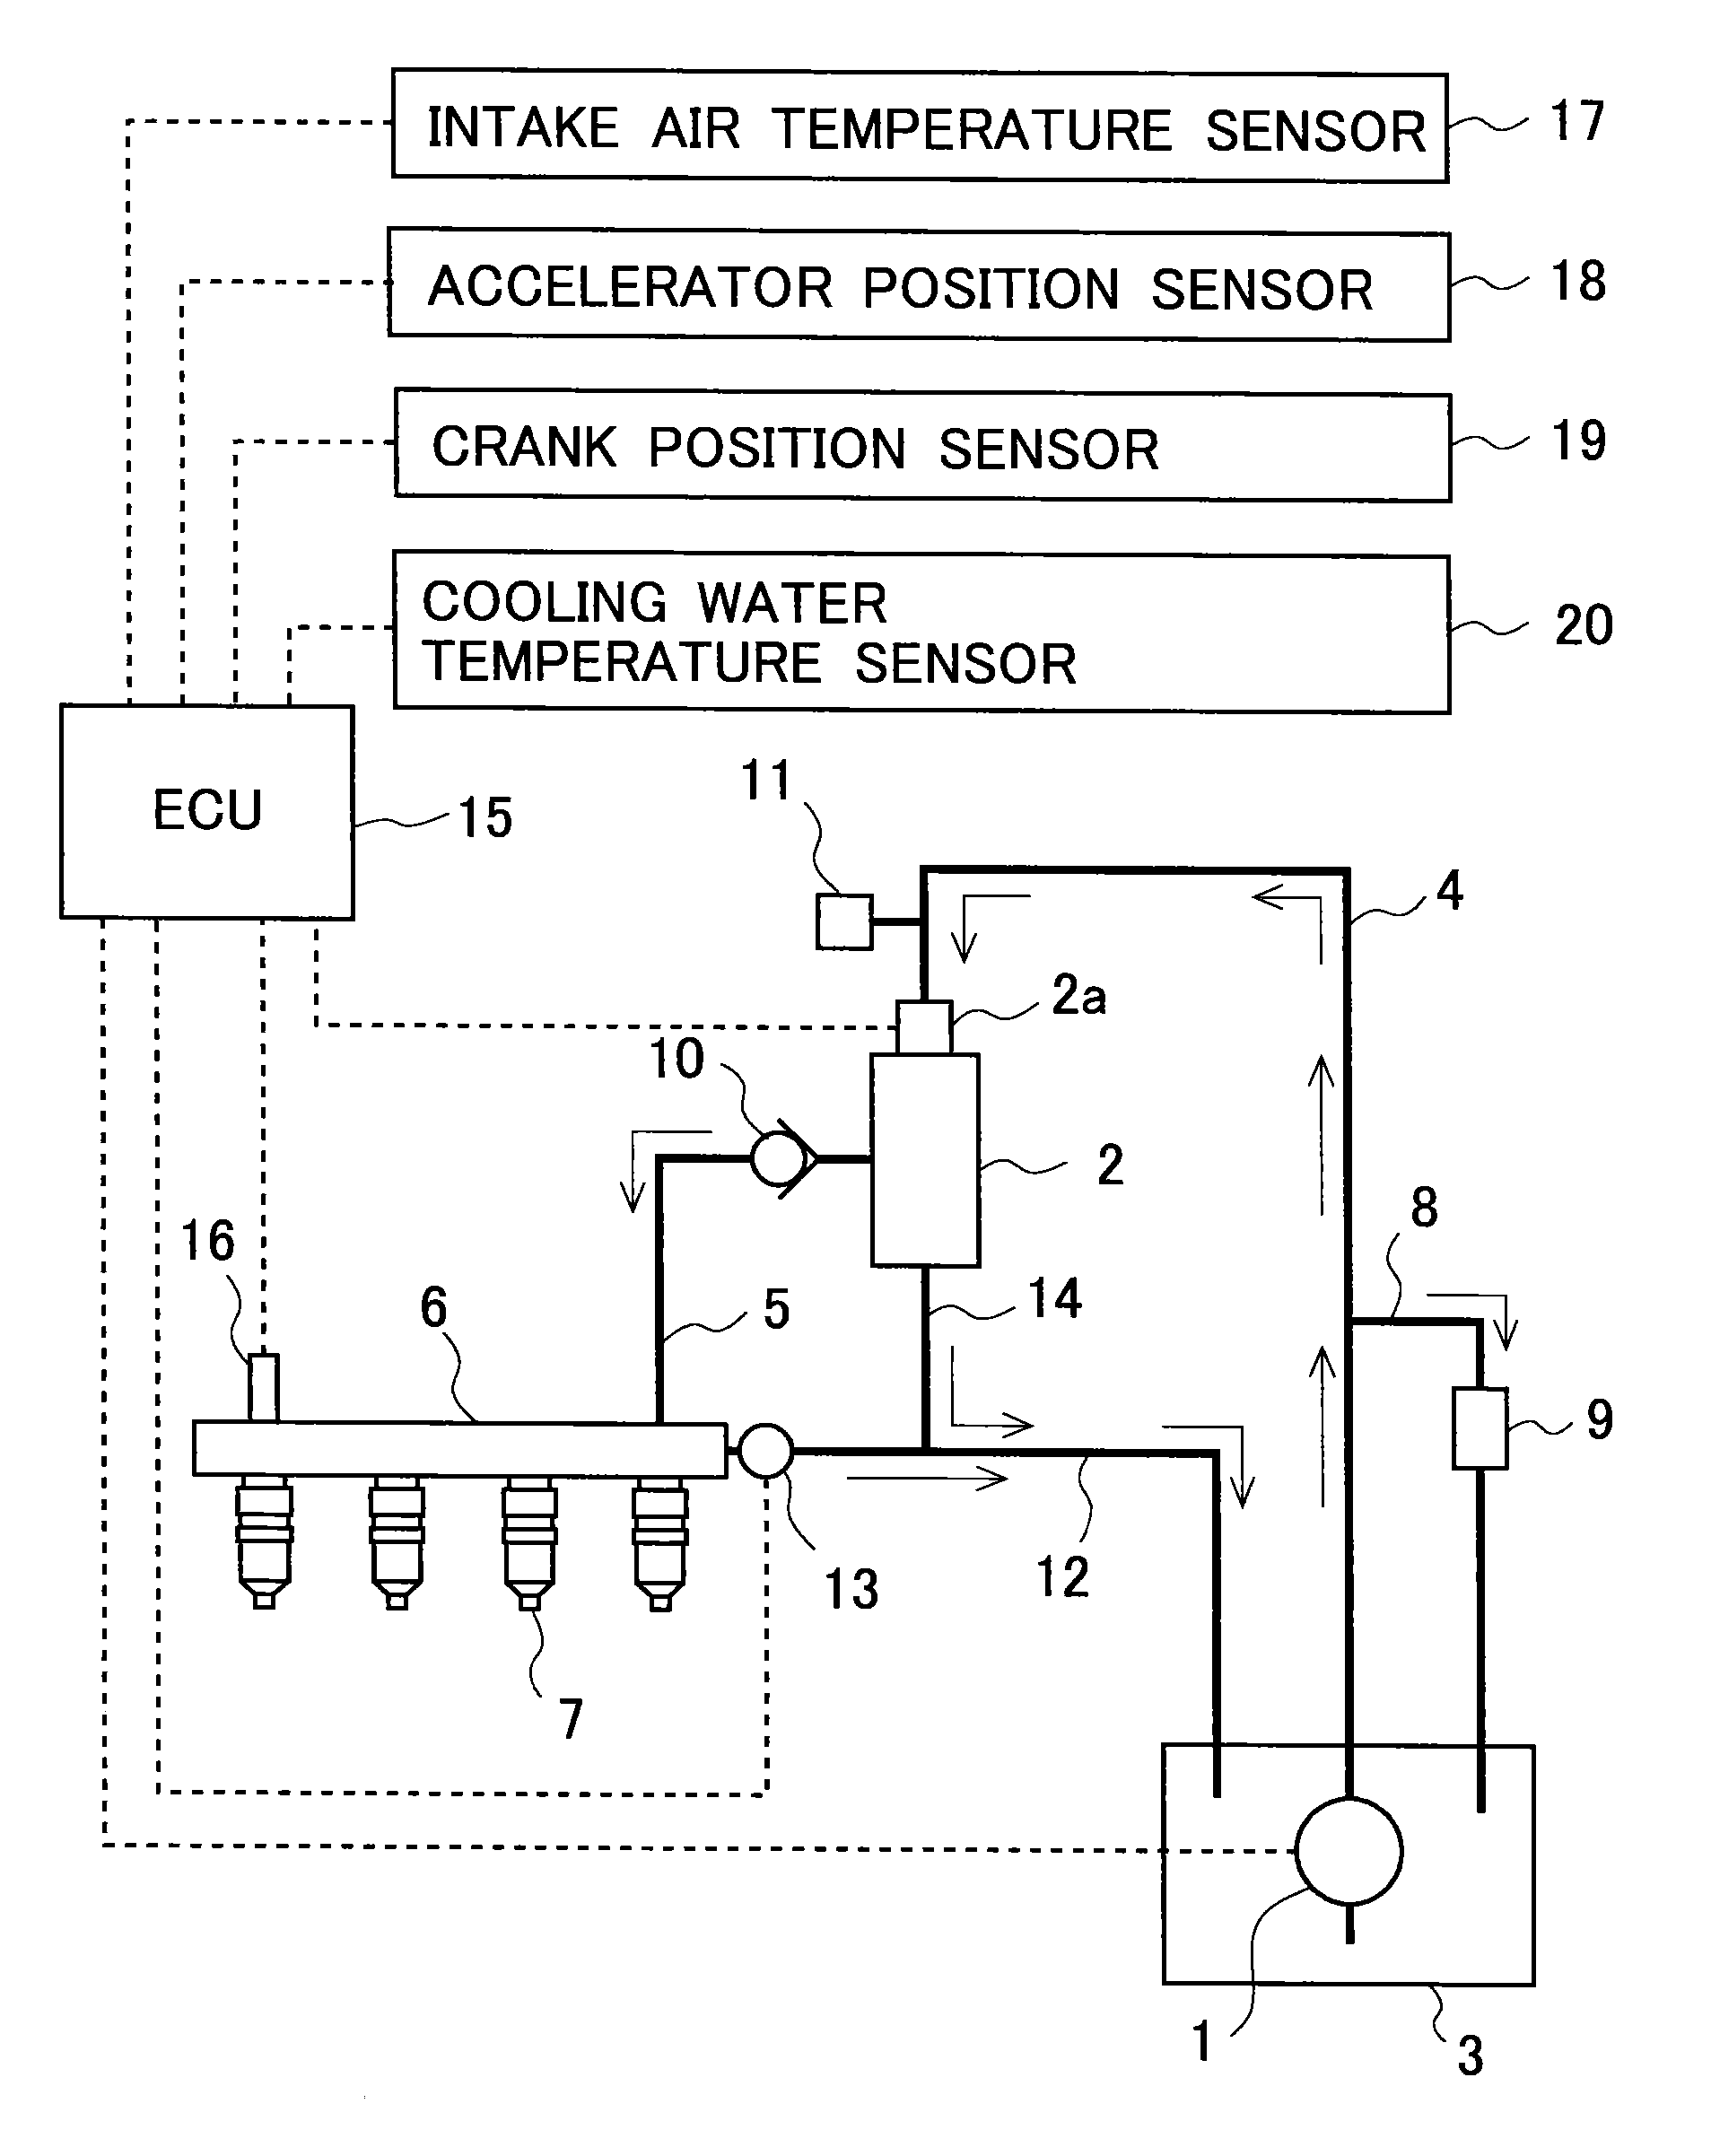 Fuel injection control system for an internal combustion engine